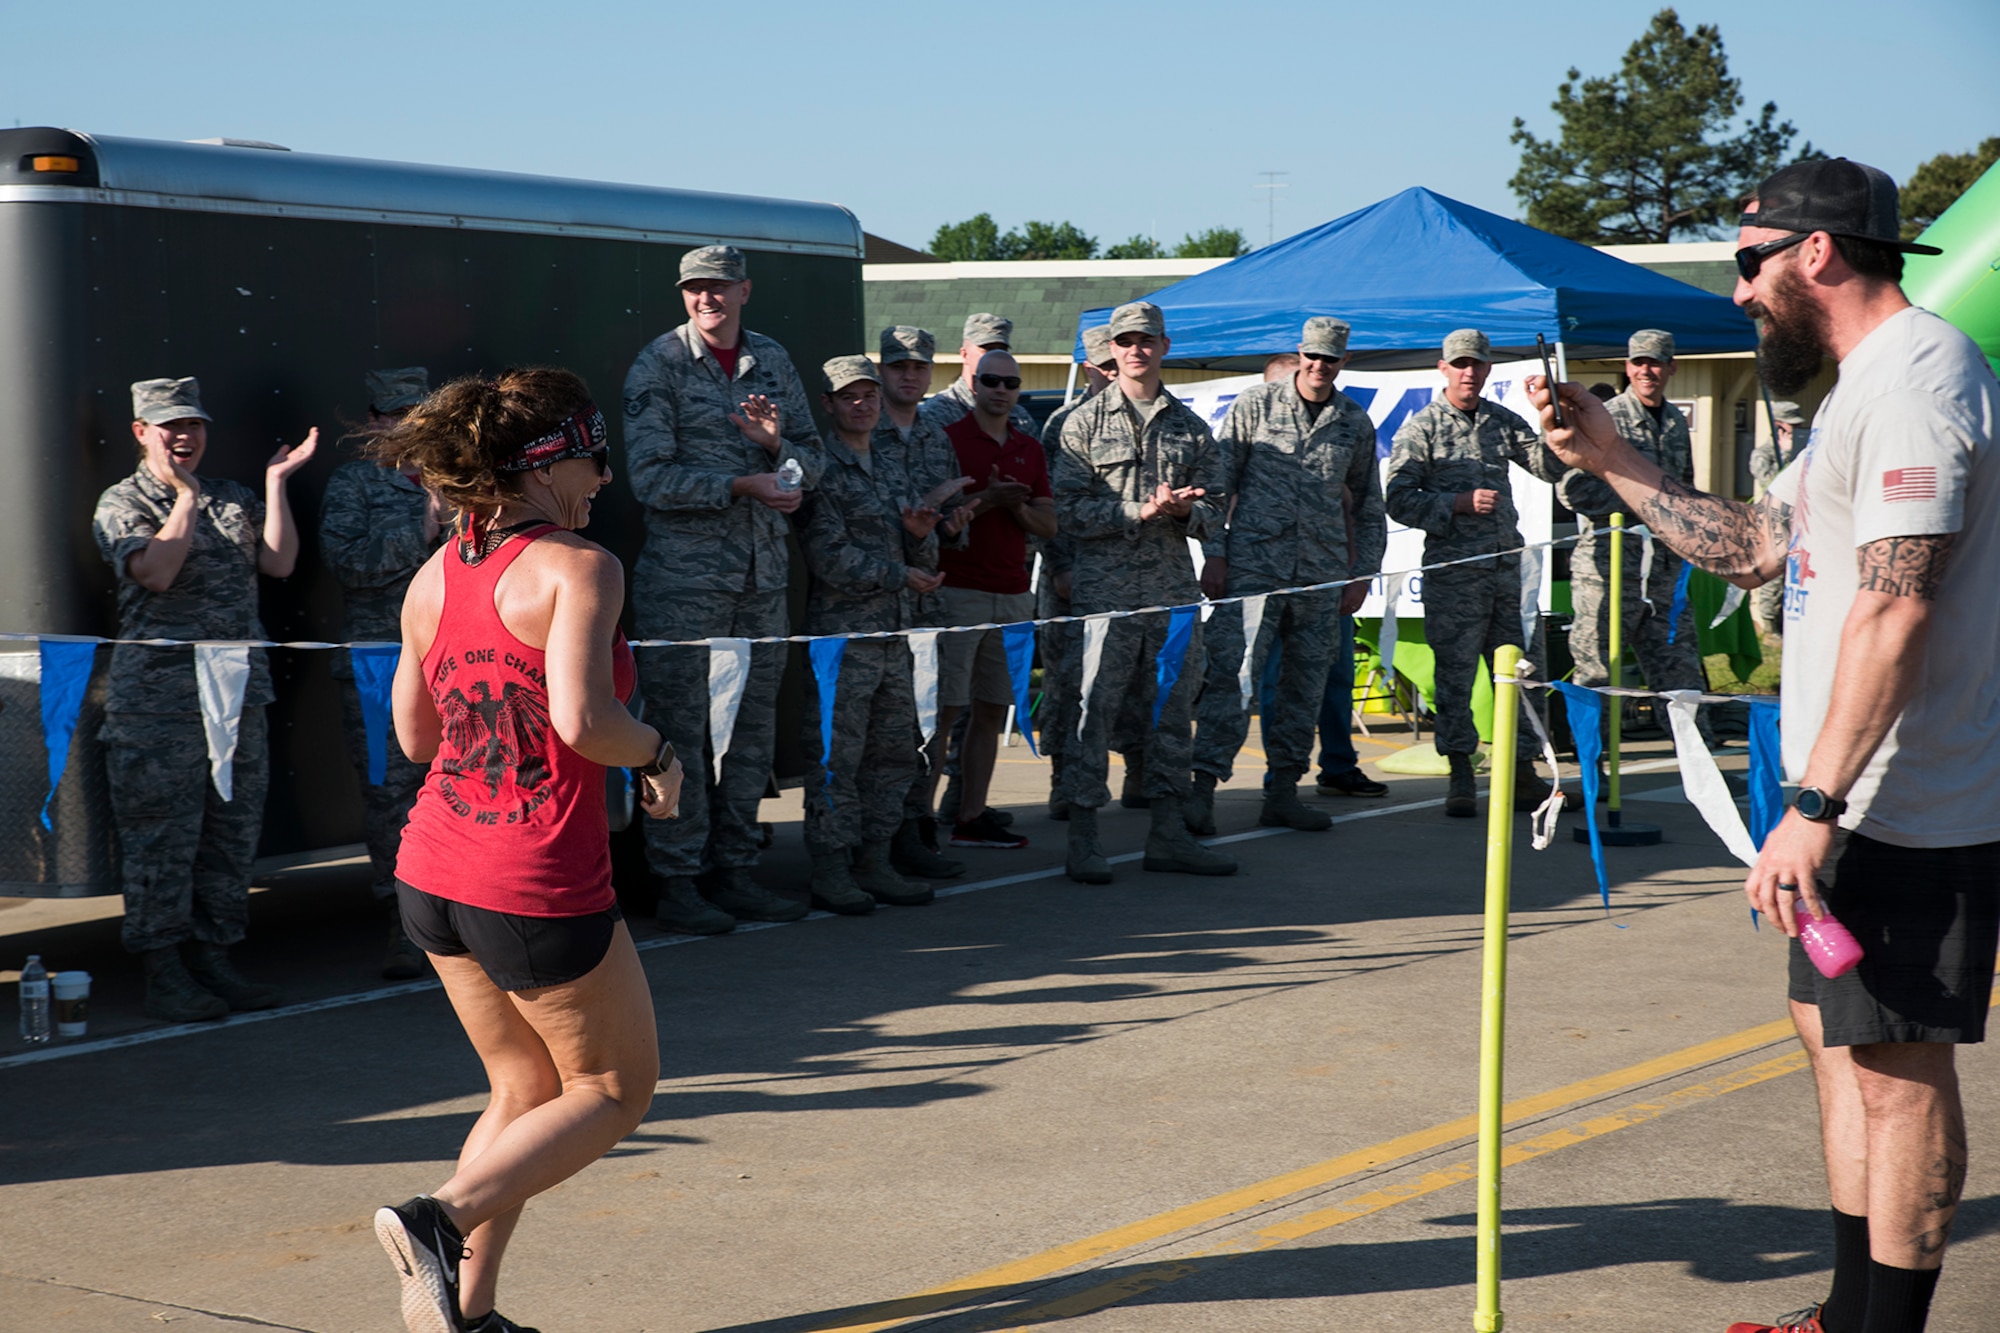 Airmen, family members, and community supporters participate in the 6th Annual Hawg Jawg 5K run held at Ebbing Air National Guard Base in Ft. Smith, Ark., May 6, 2018. The event was part of the 188th Wing’s annual family day, an event designed to build morale and camaraderie for wing members and families. (U.S. Air National Guard photo by Tech. Sgt. John E. Hillier)